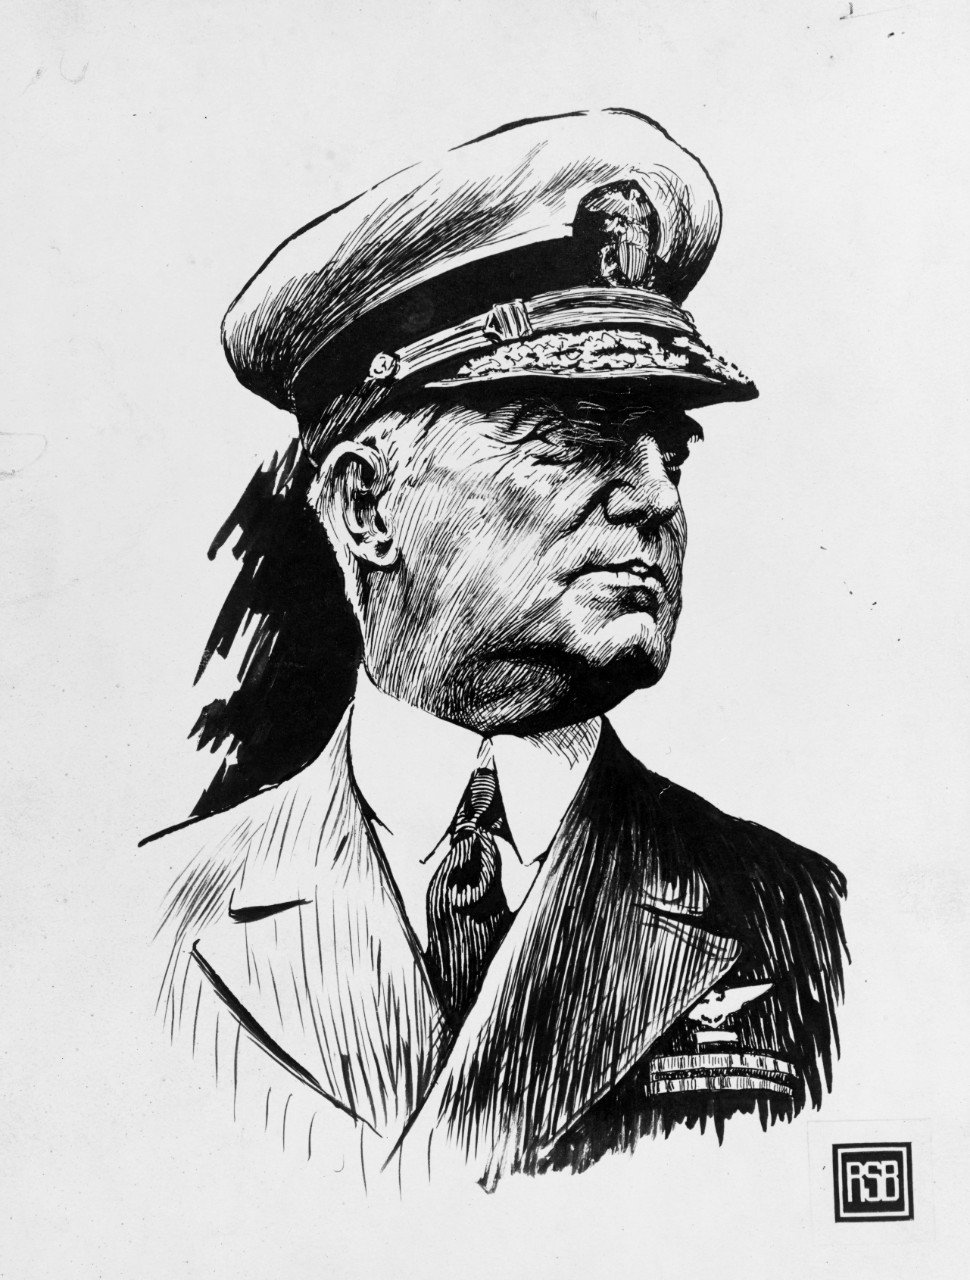 A May 8, 1969 photograph by PH2 McMullin of a drawing by 'RSB' of RADM William A. Moffett. 